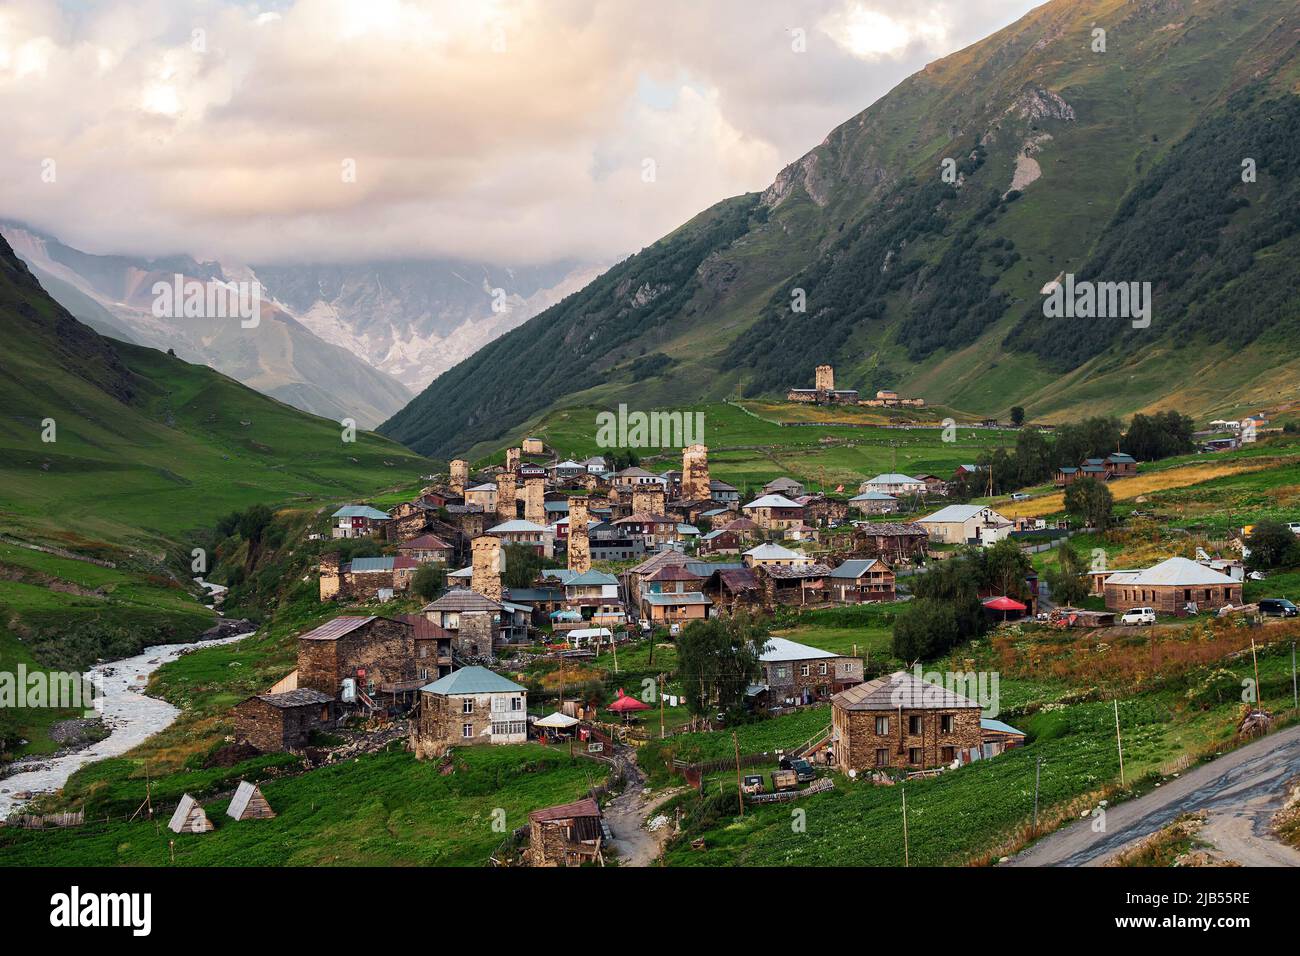 Viev of the village of Ushguli, in Georgia Caucasus mountains, upper Svaneti, the highest inhabited village in Europe and an UNESCO World Heritage Sit Stock Photo